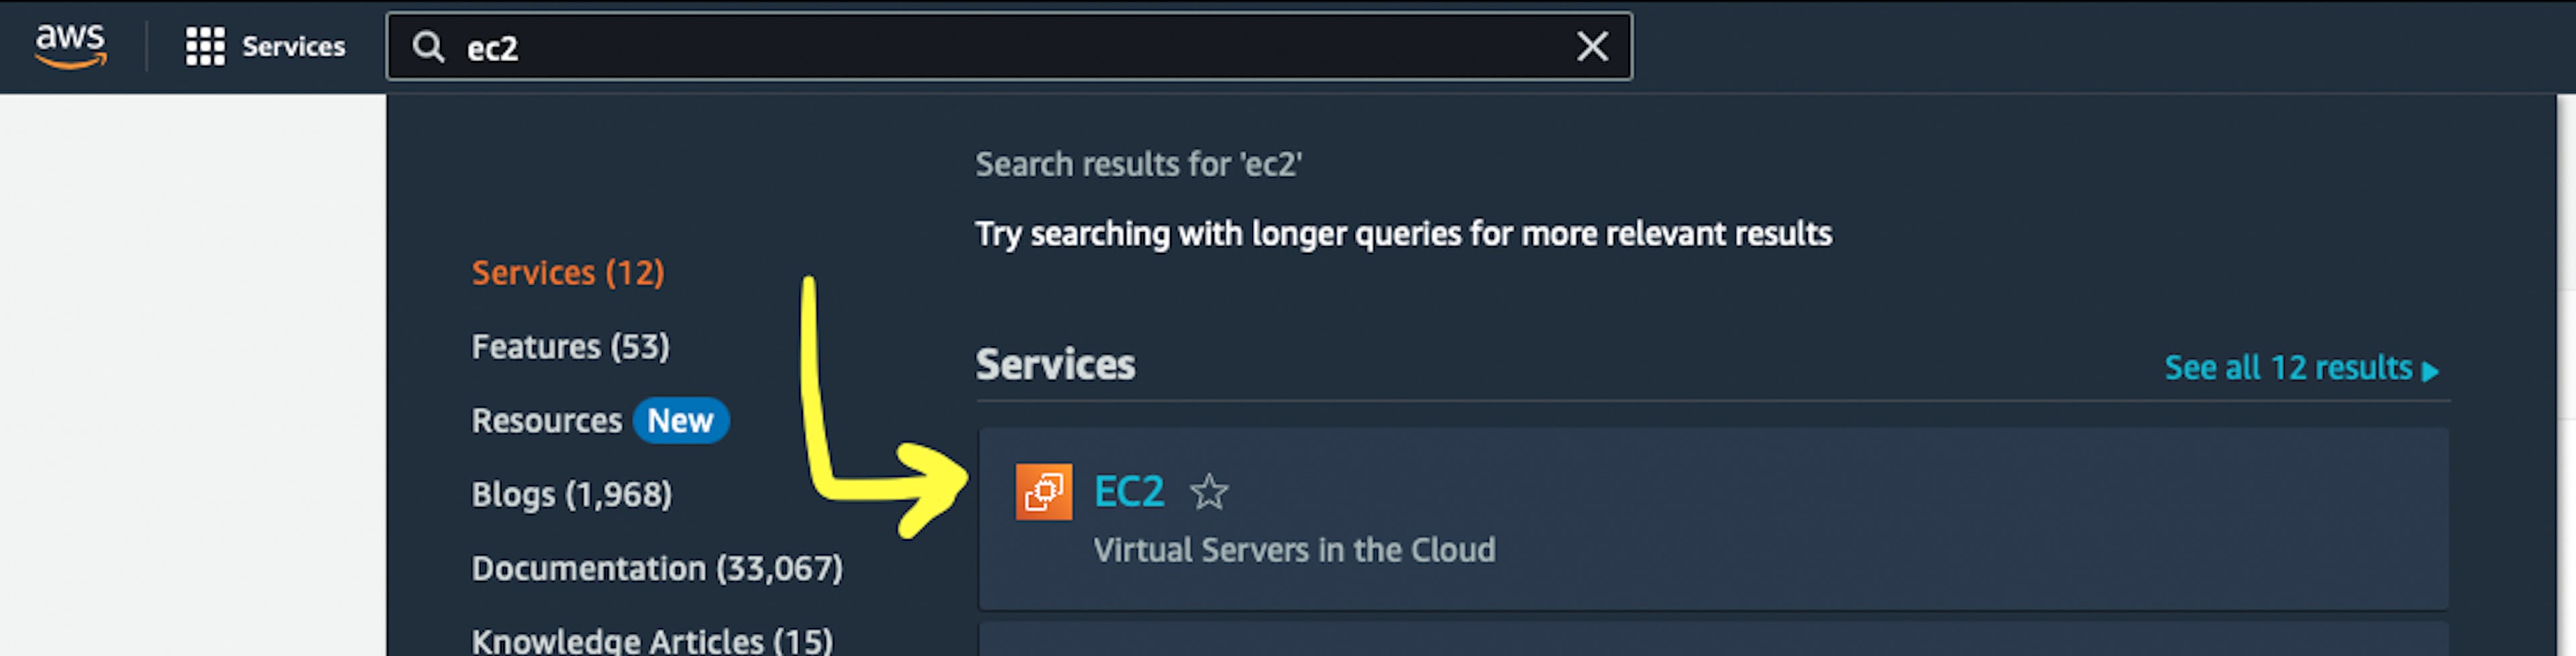 The screenshot of AWS web page with the pointer to "EC2" AWS service